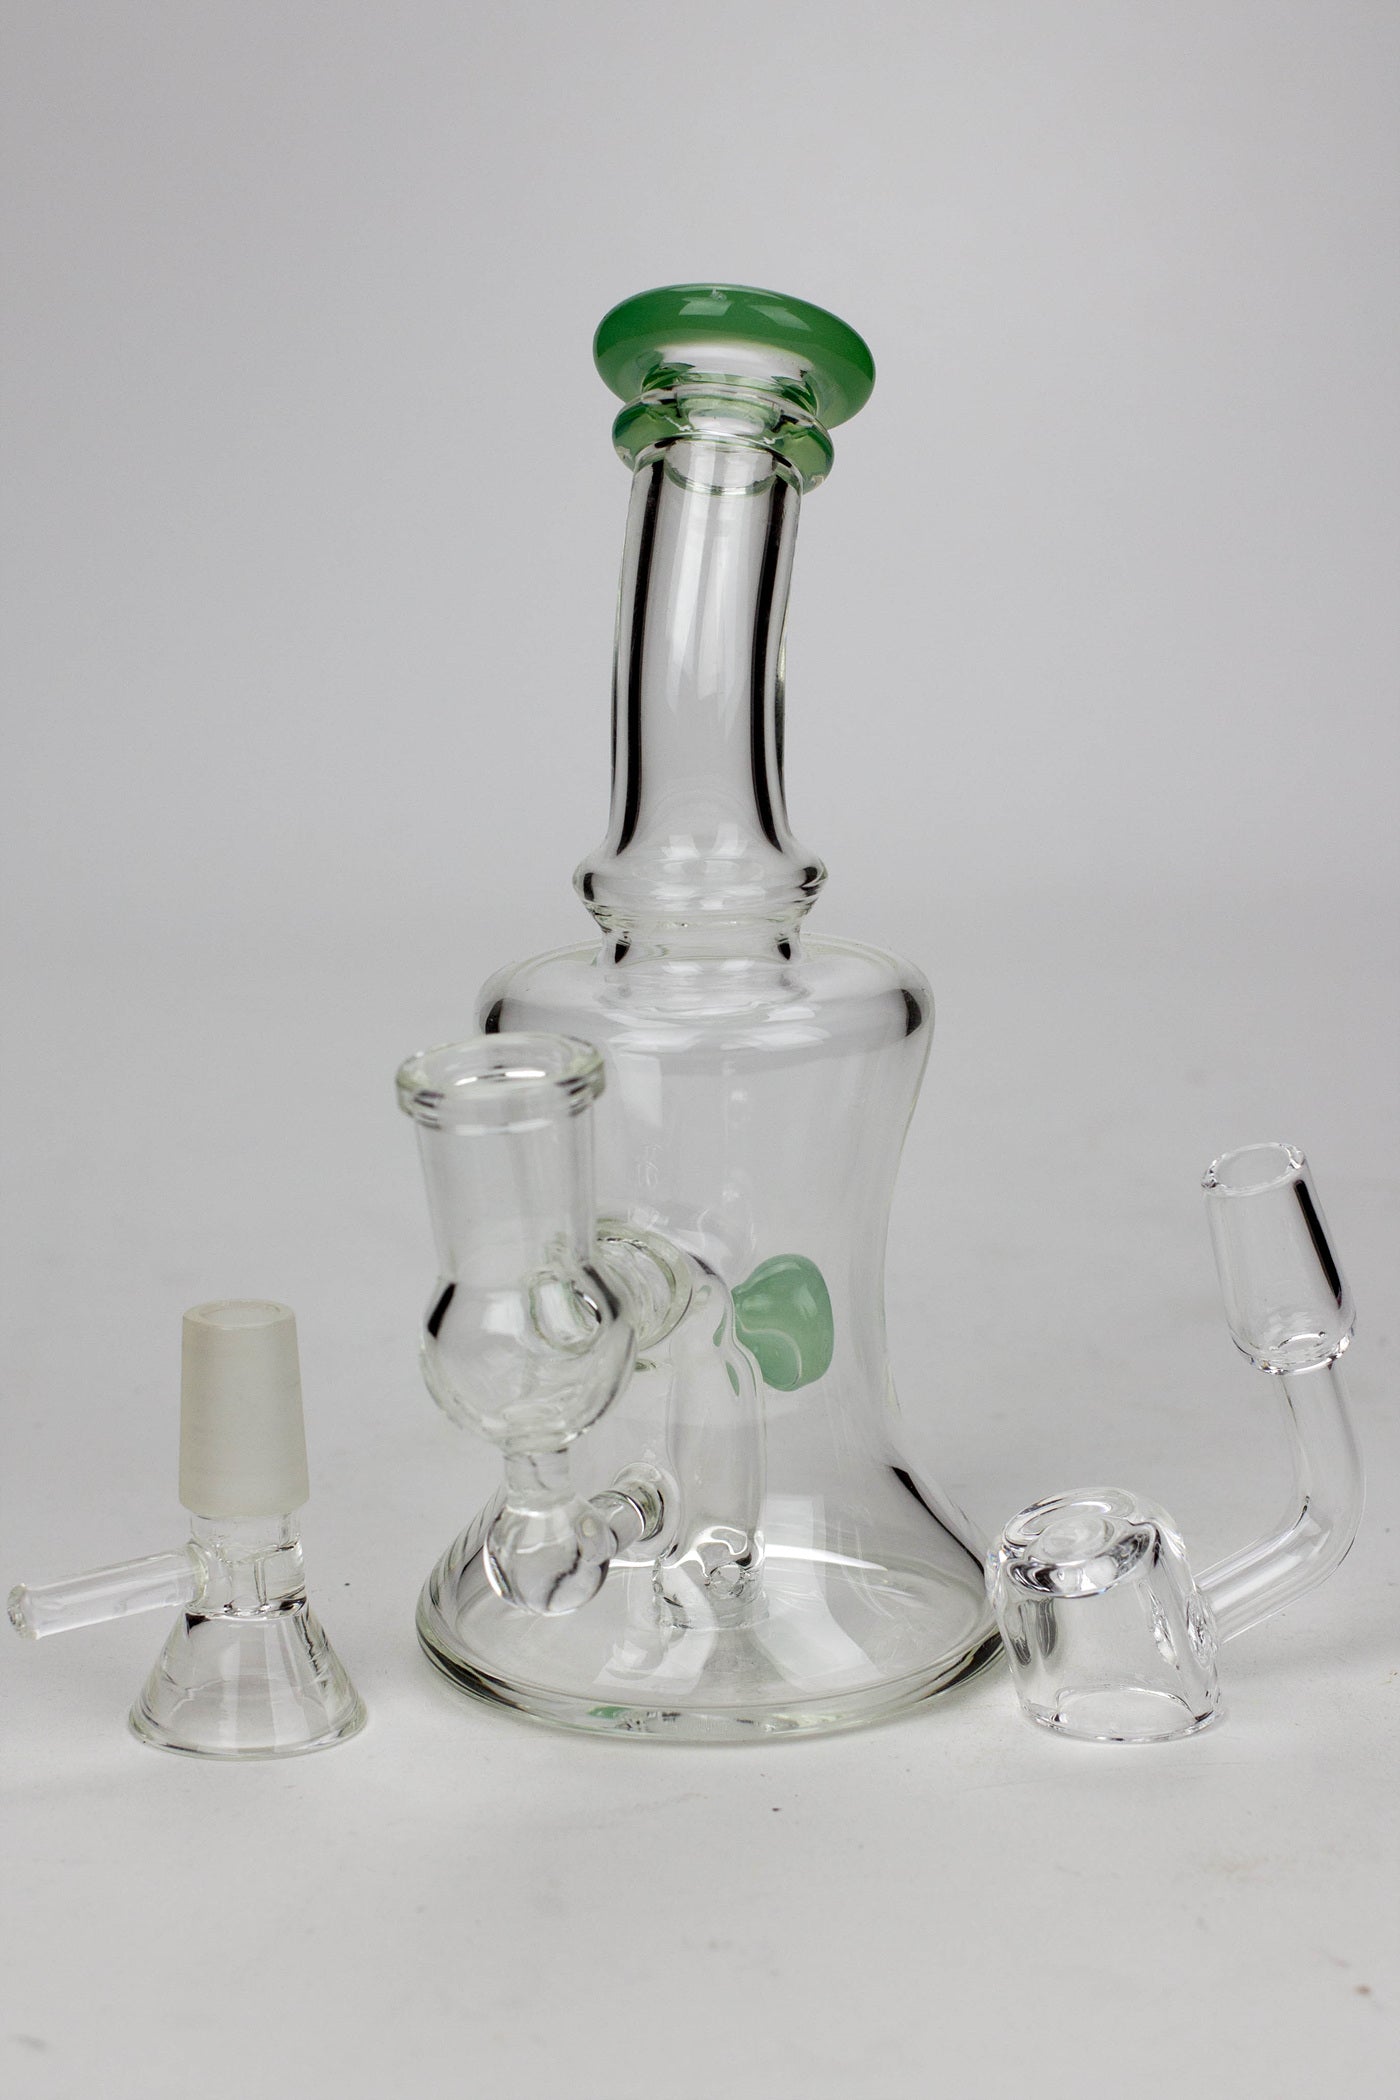 6" 2-in-1 fixed 3 hole diffuser Skirt bubbler_6